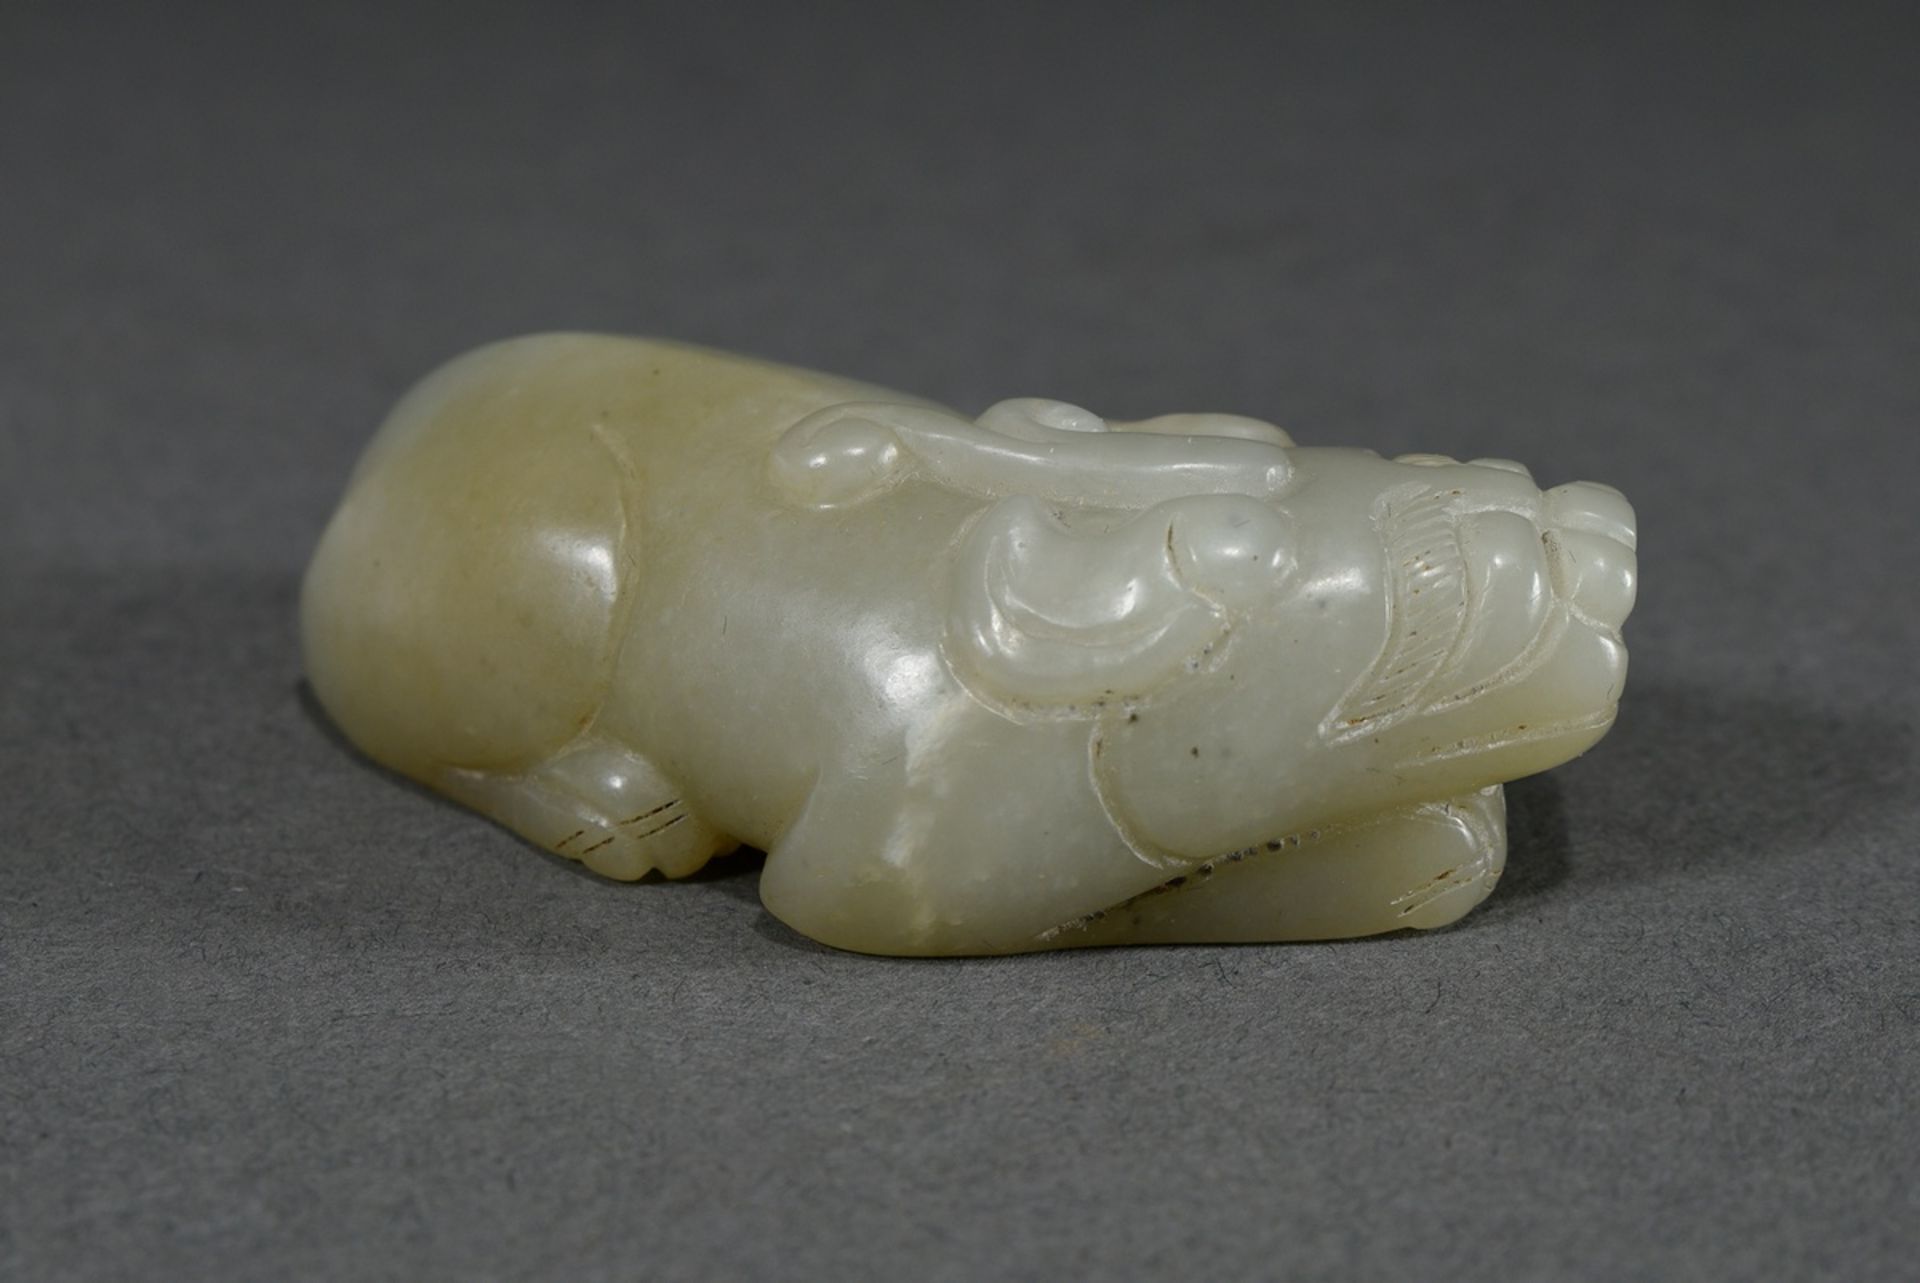 Fine celadon jade figure "Reclining Qilin" in Song style, China, l. 6cm - Image 2 of 4